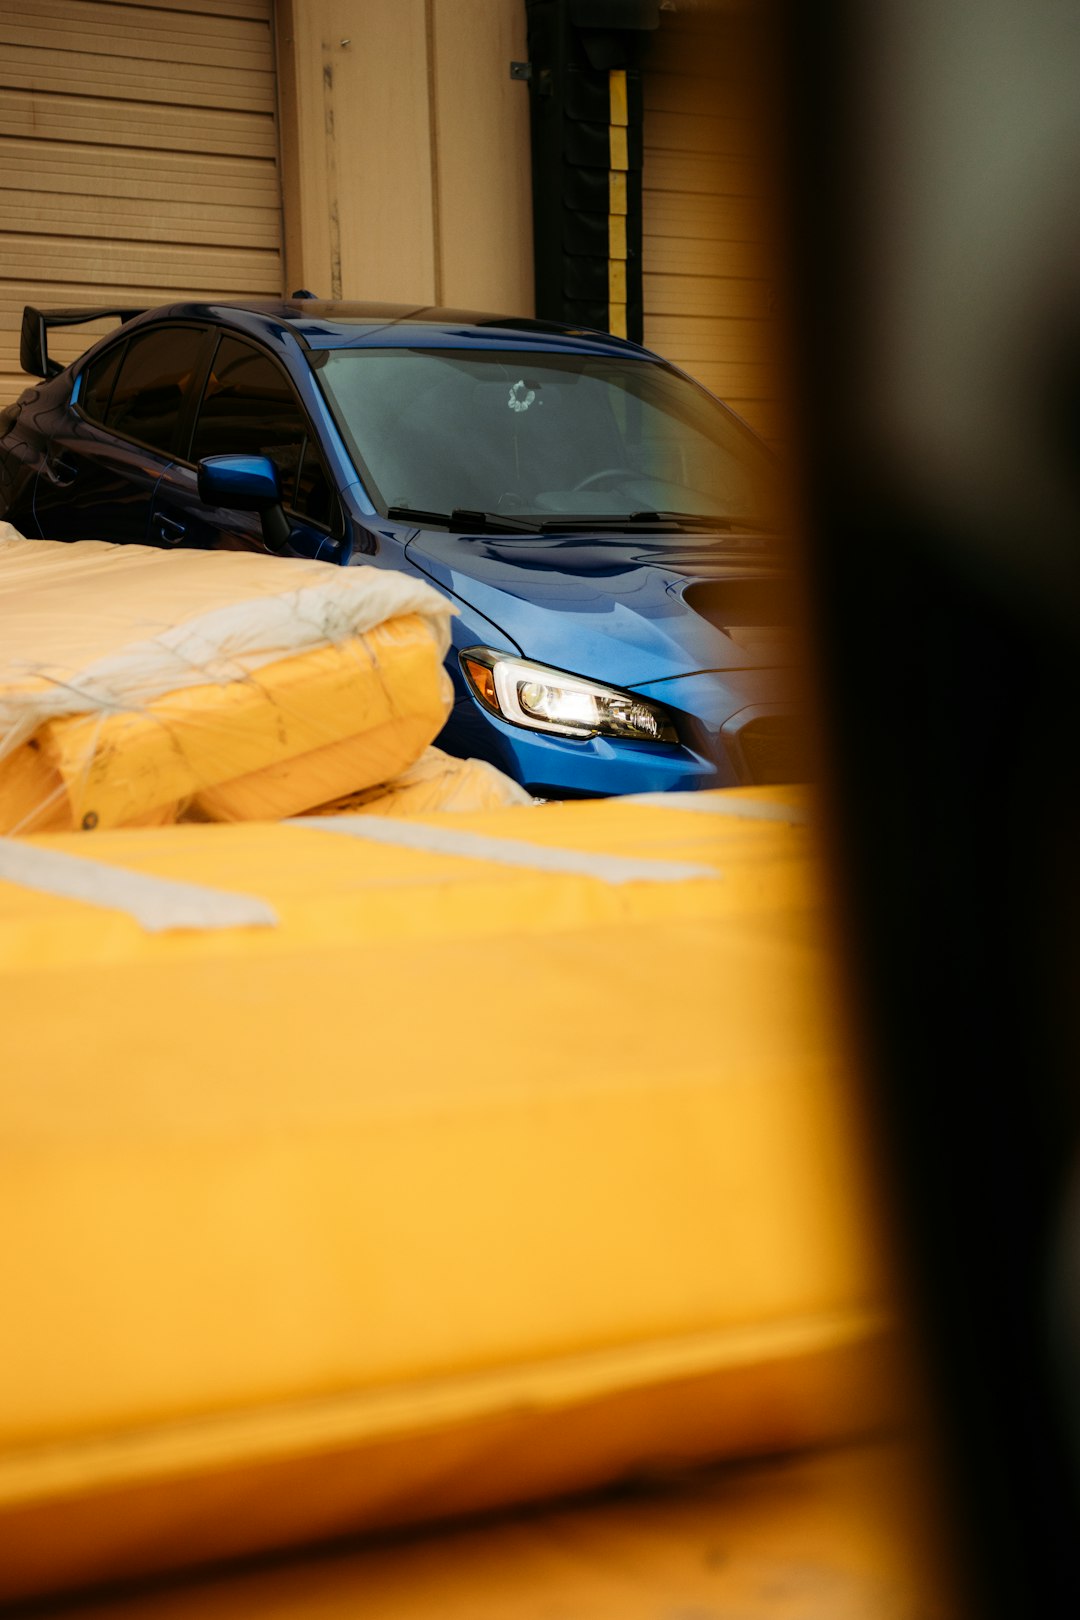 blue and black car in a garage